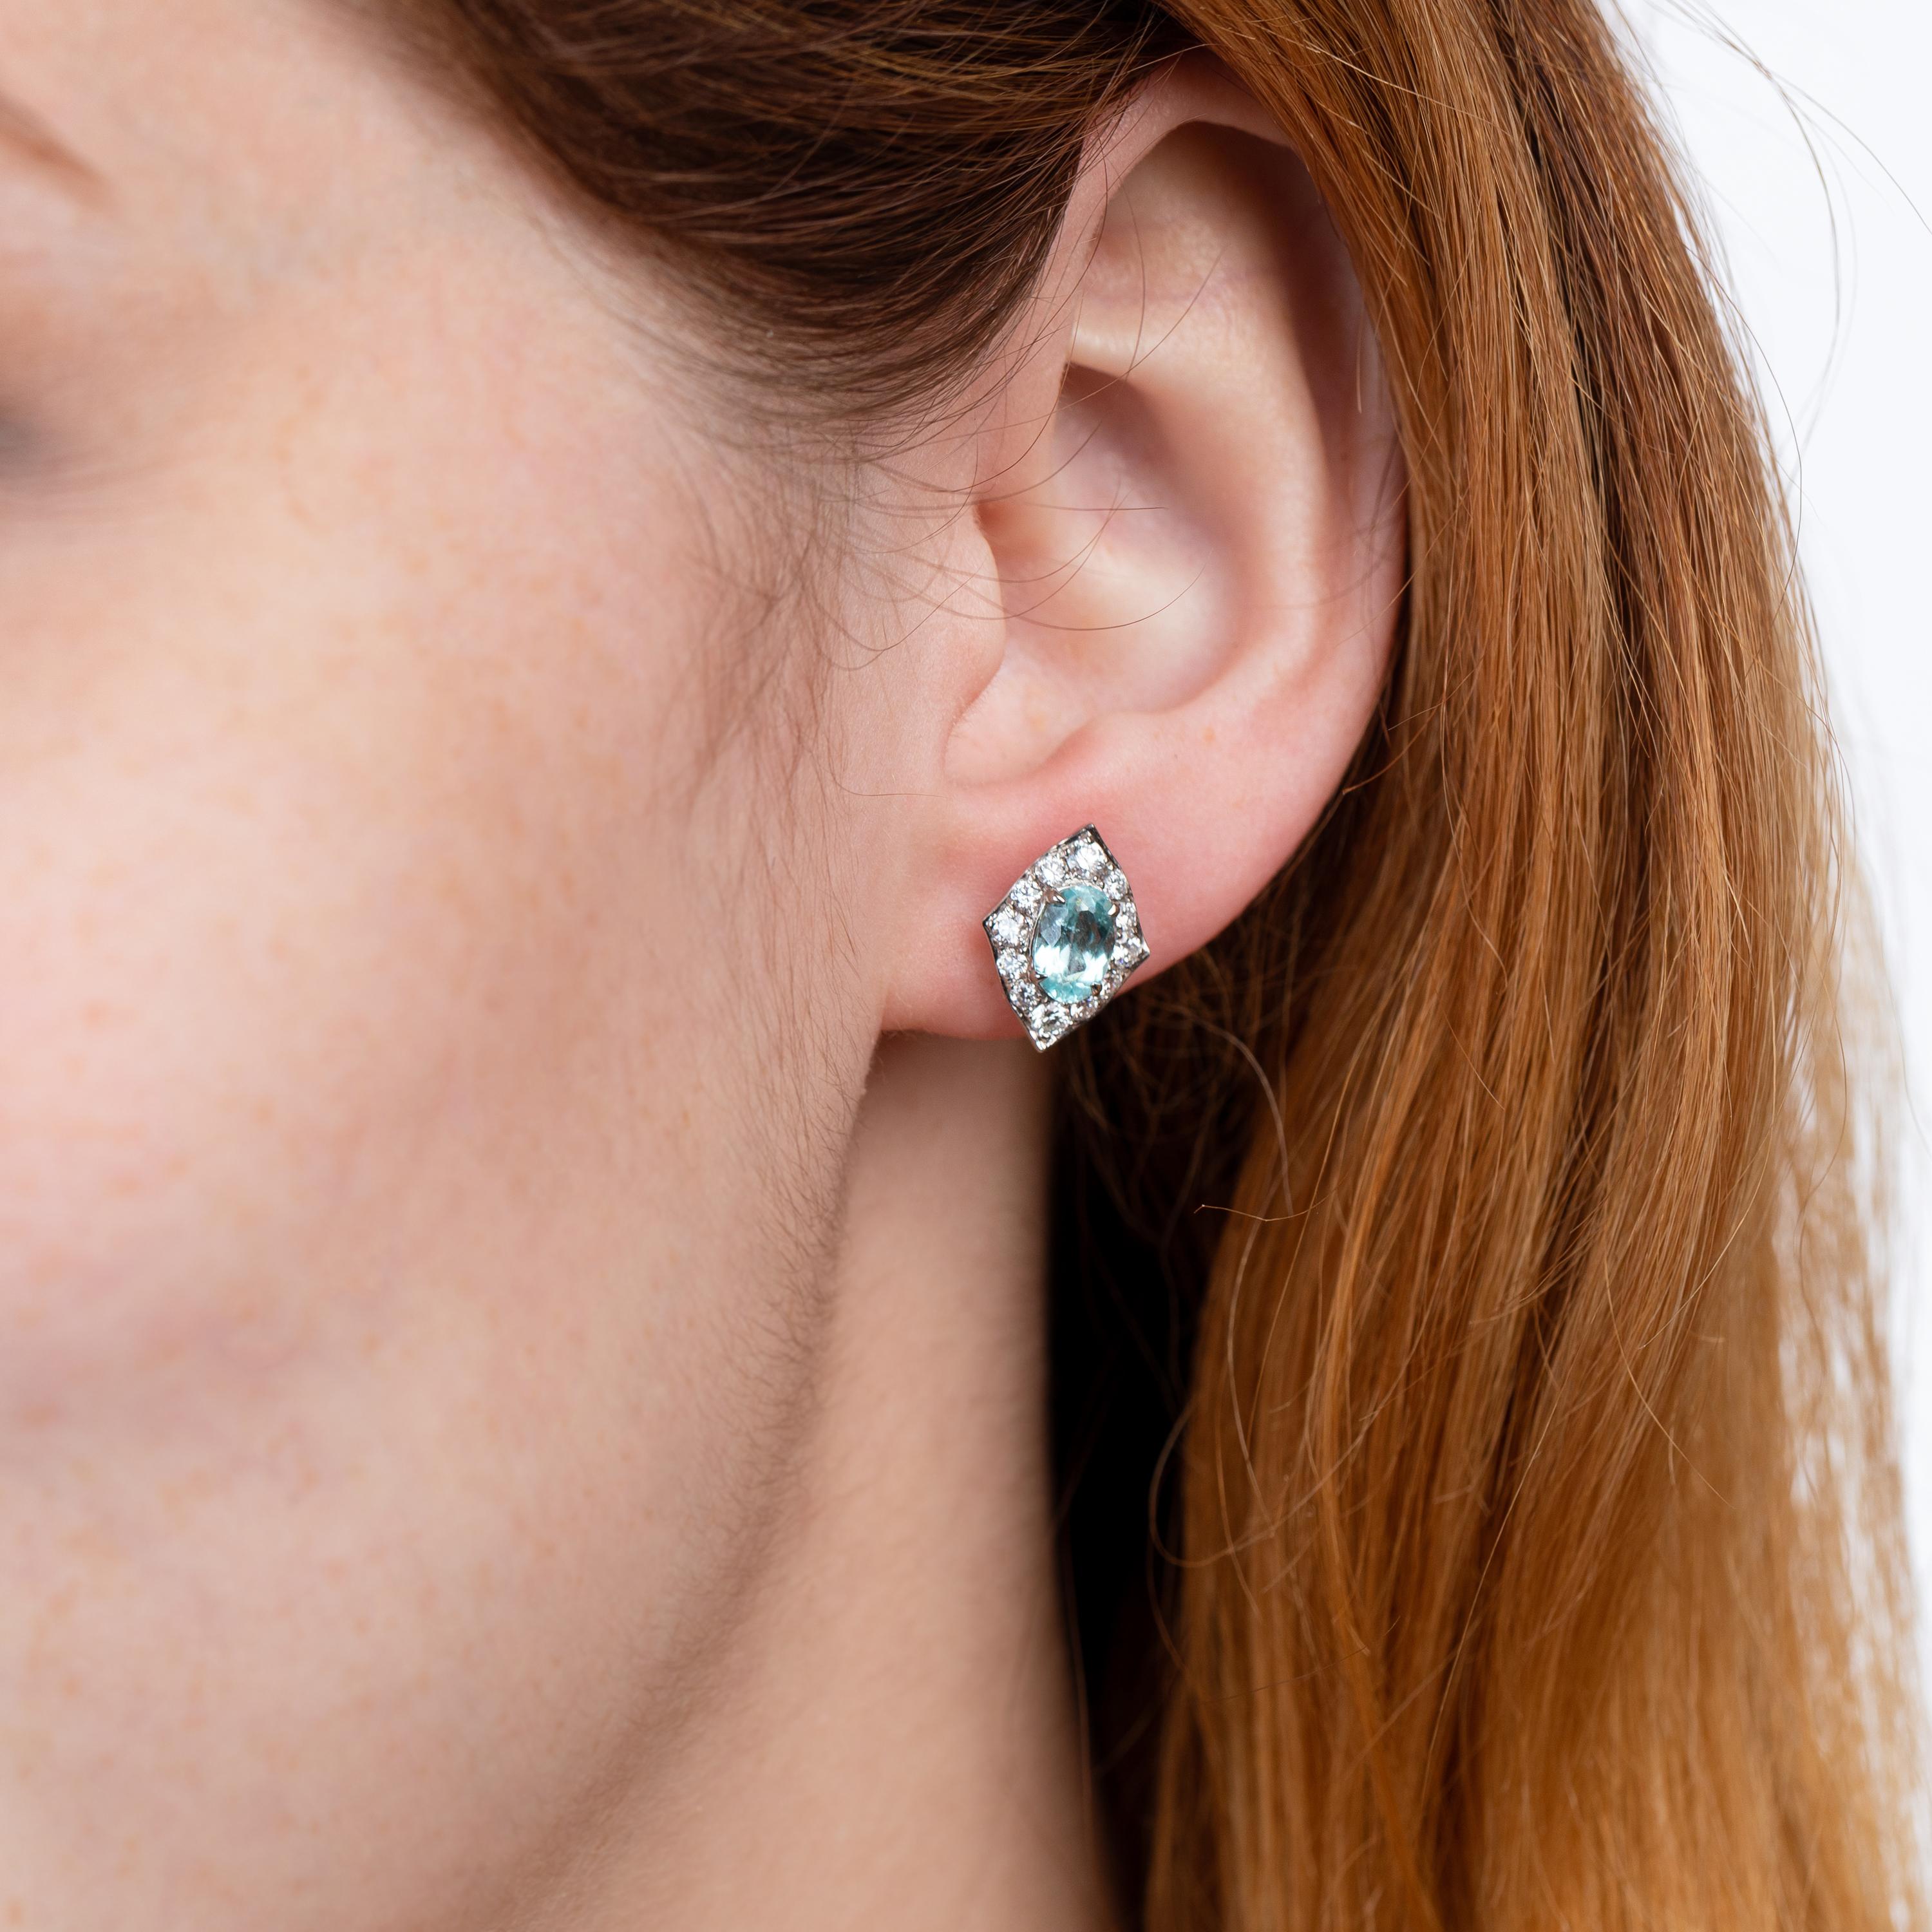 Contemporary Nigaam 1.25 Cts. Paraiba and 0.66 Cts. Diamond Stud Earrings in 18K White Gold